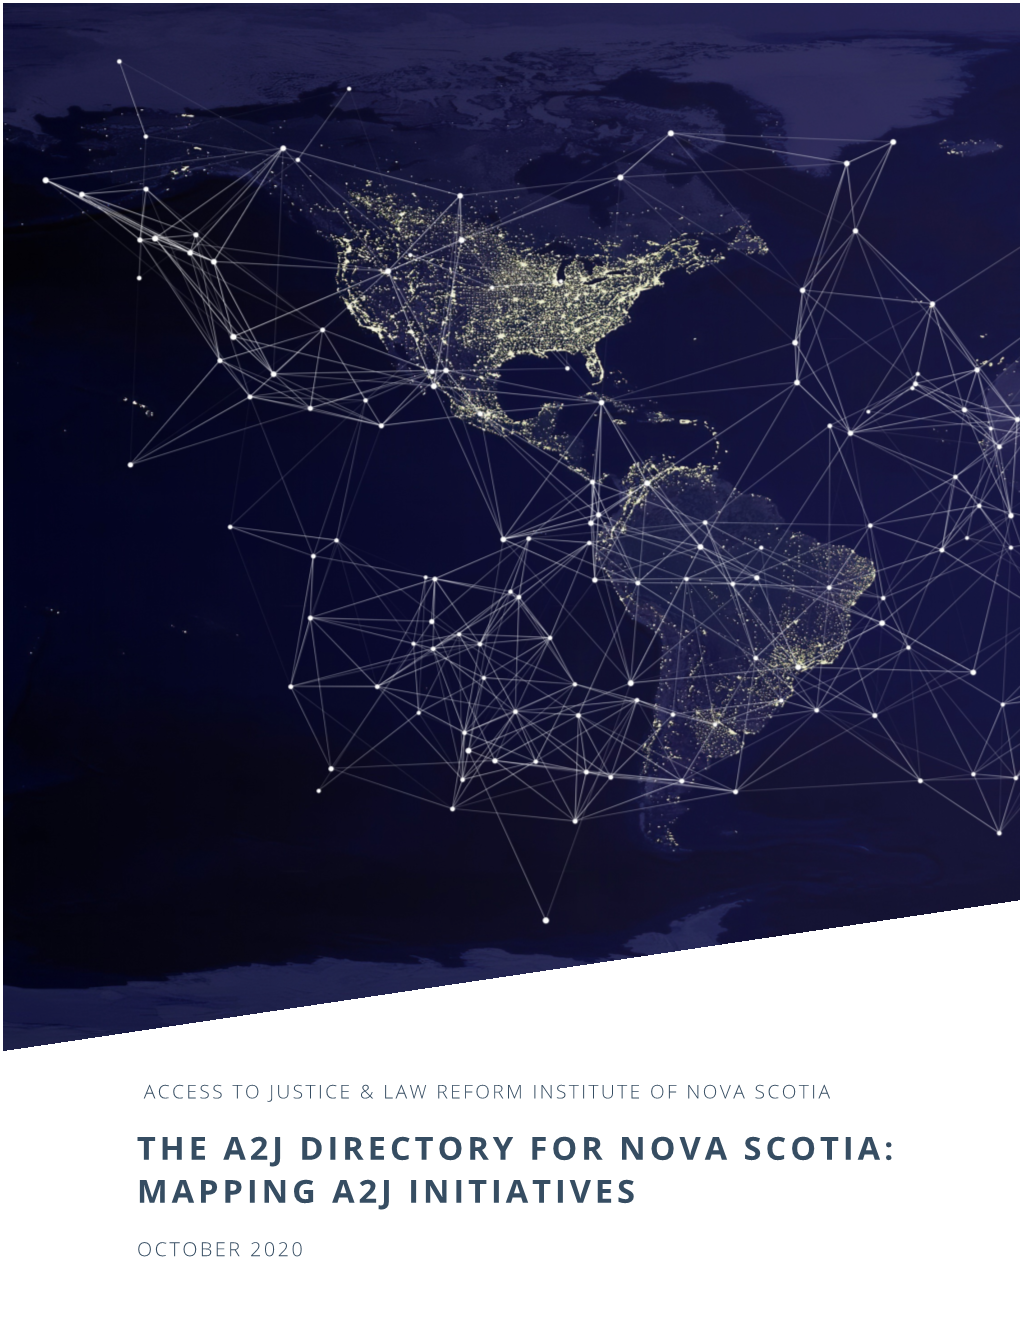 The A2j Directory for Nova Scotia: Mapping A2j Initiatives